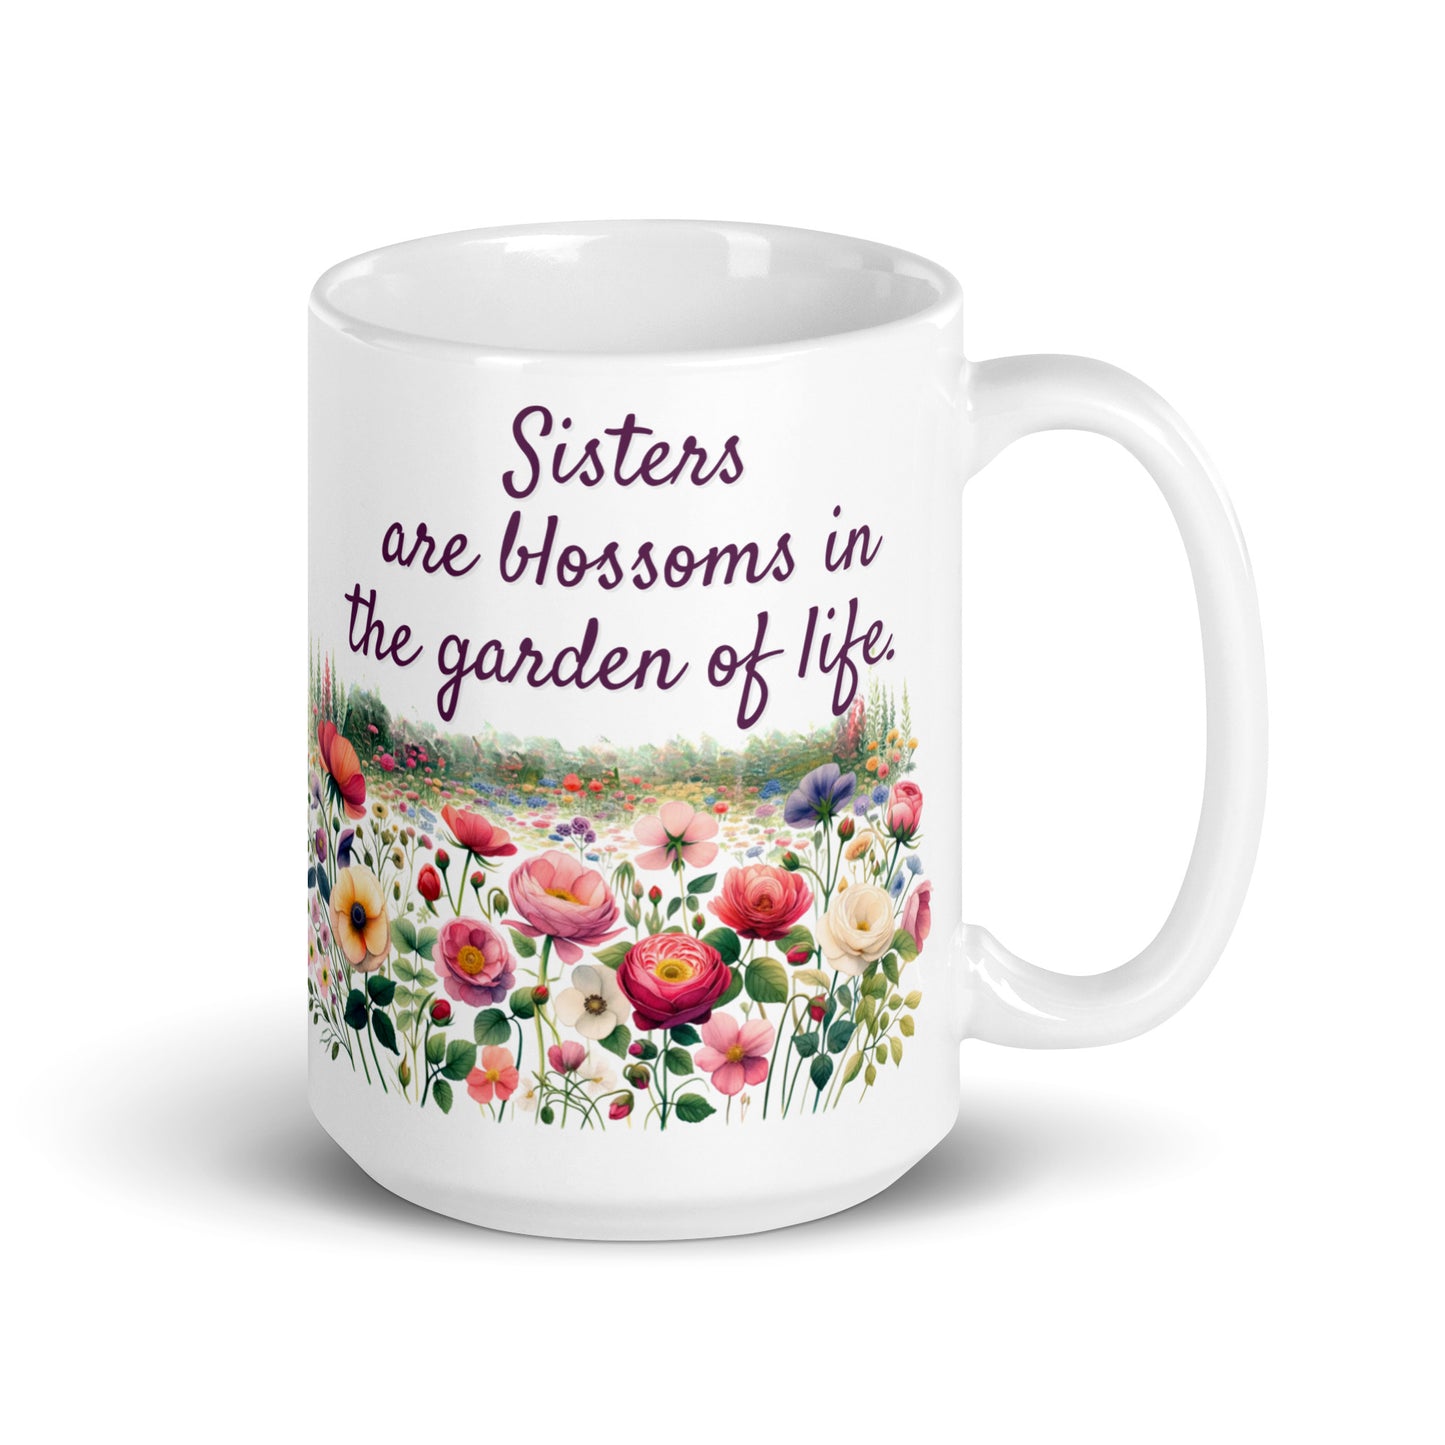 White Glossy Mug - Sisters are Blossoms in Garden of Life